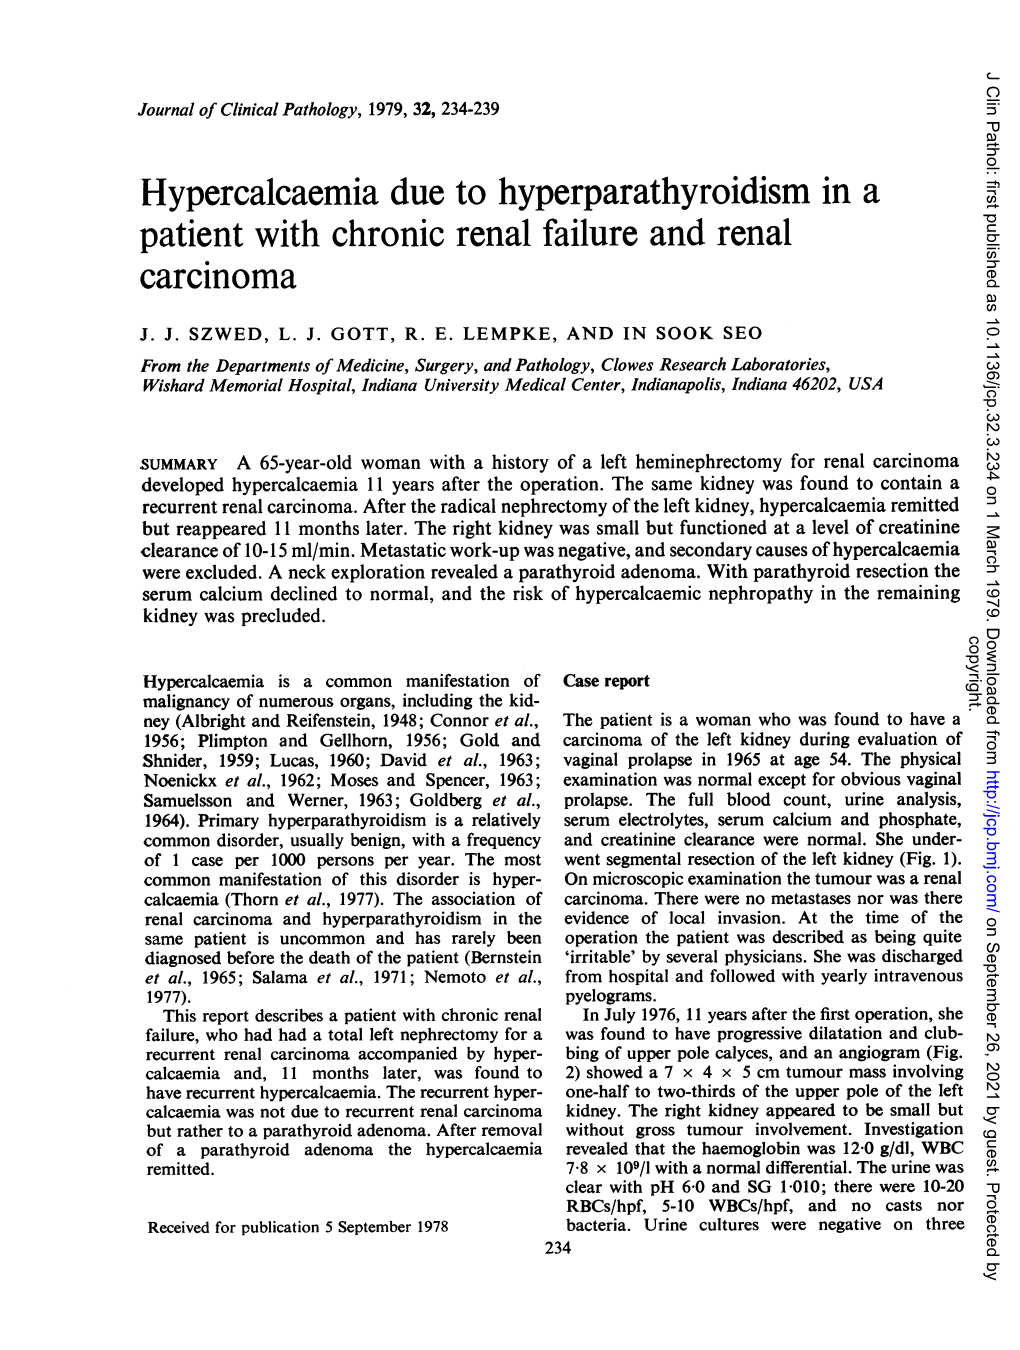 Hypercalcaemia Due to Hyperparathyroidism in a Patient with Chronic Renal Failure and Renal Carcinoma